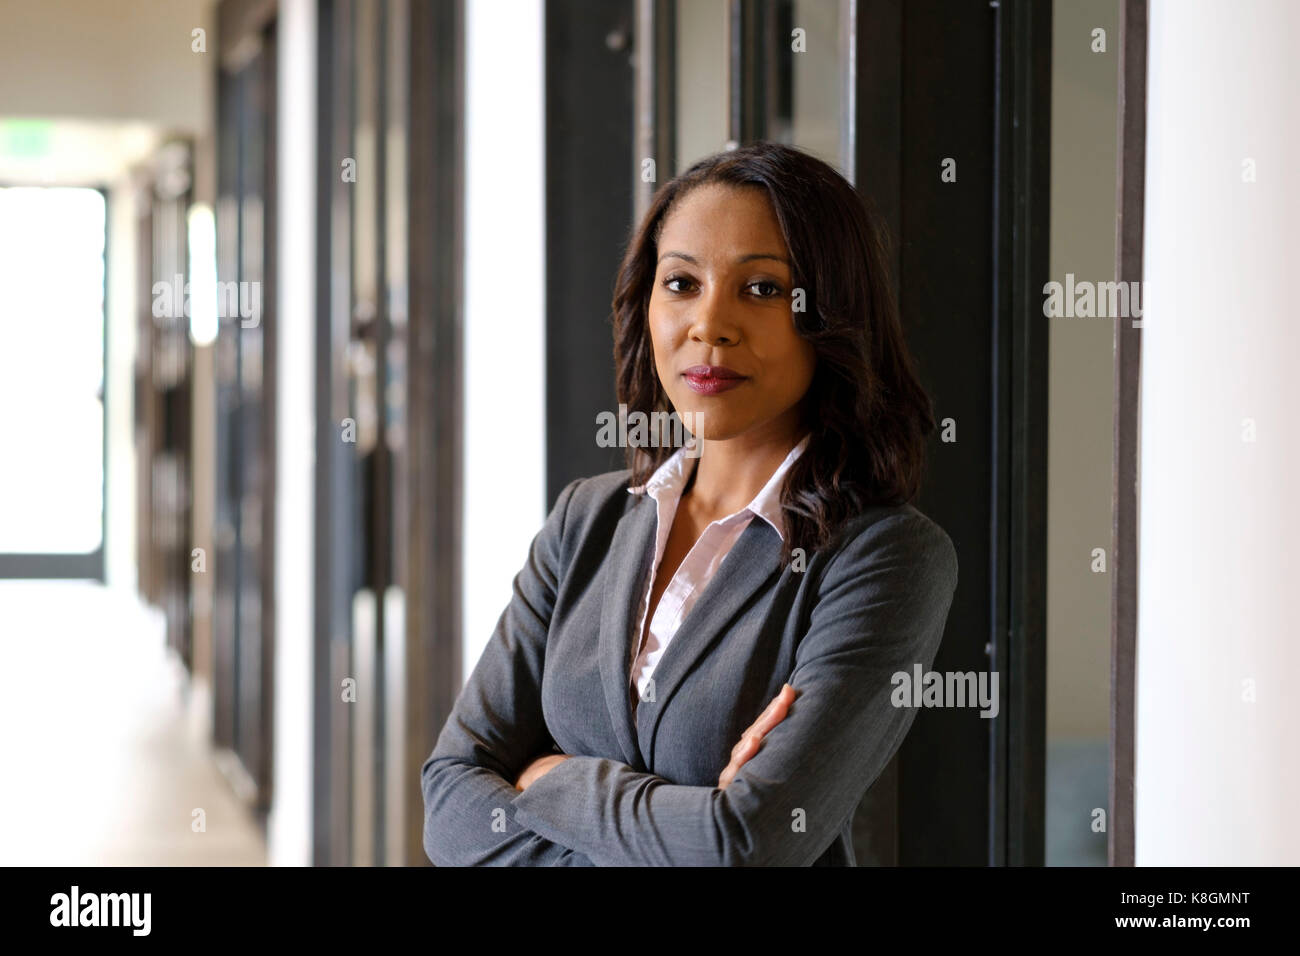 Portrait of businesswoman in office hallway, arms folded, serious expression Stock Photo